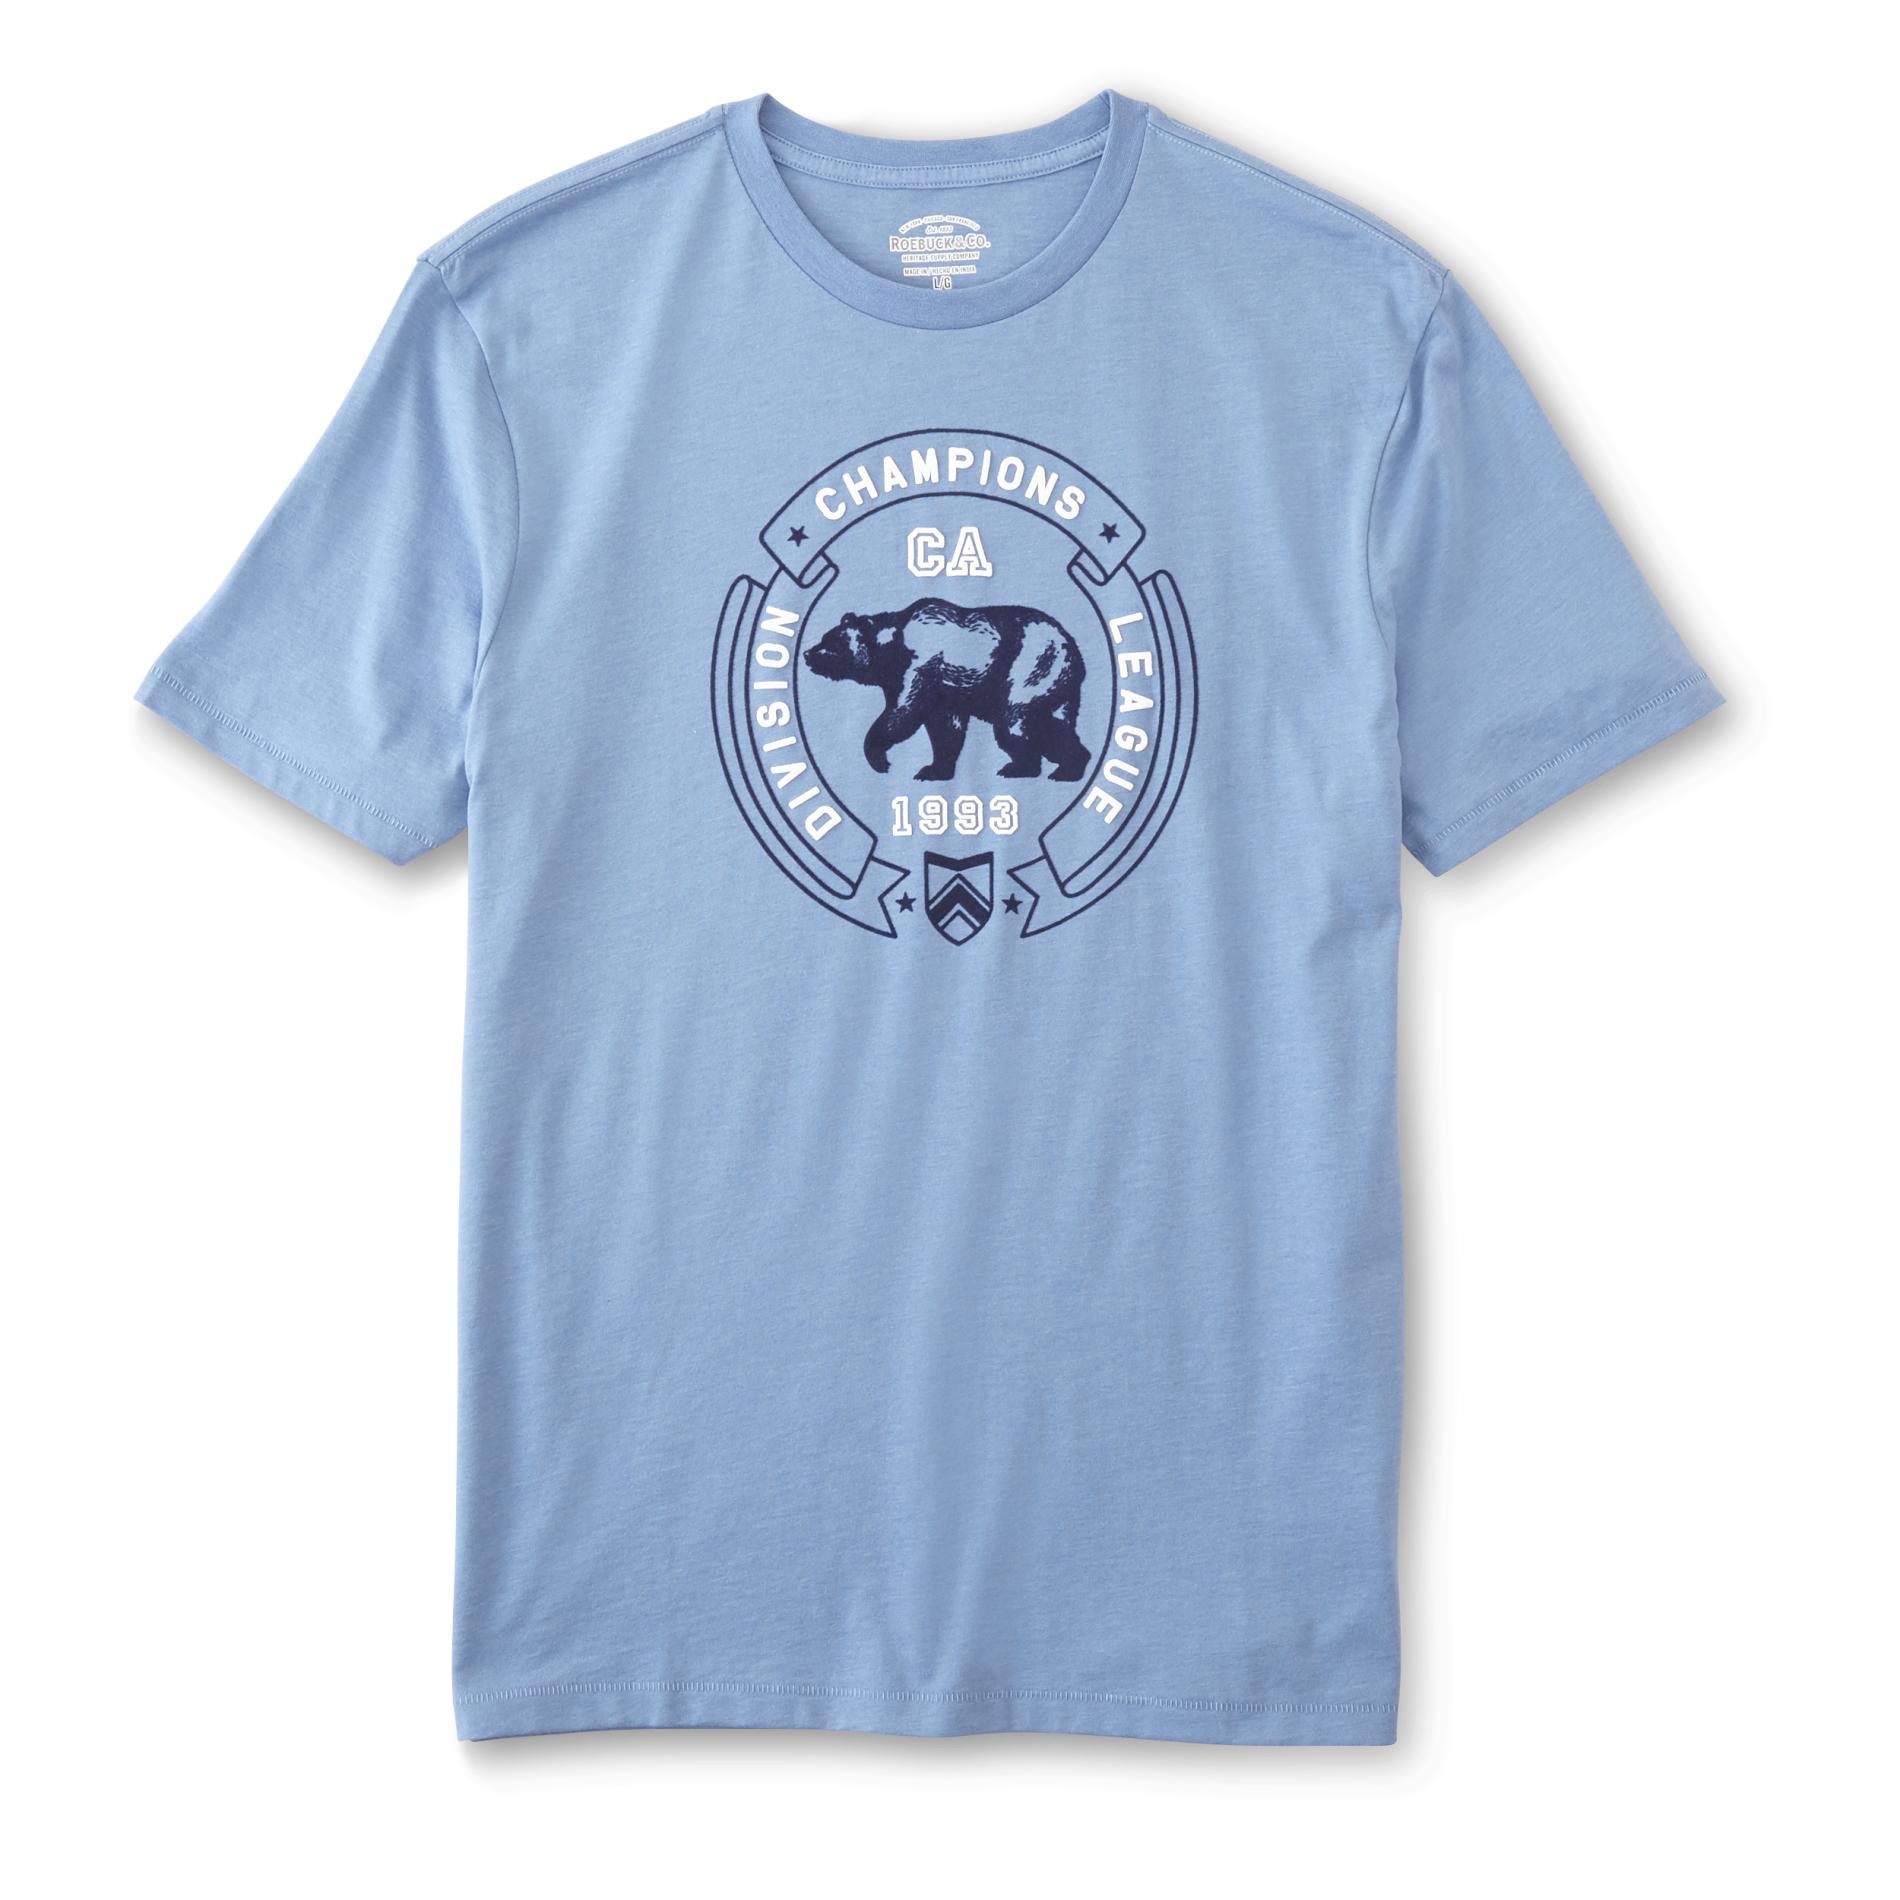 Roebuck & Co. Young Men's Graphic T-Shirt - Division Champions